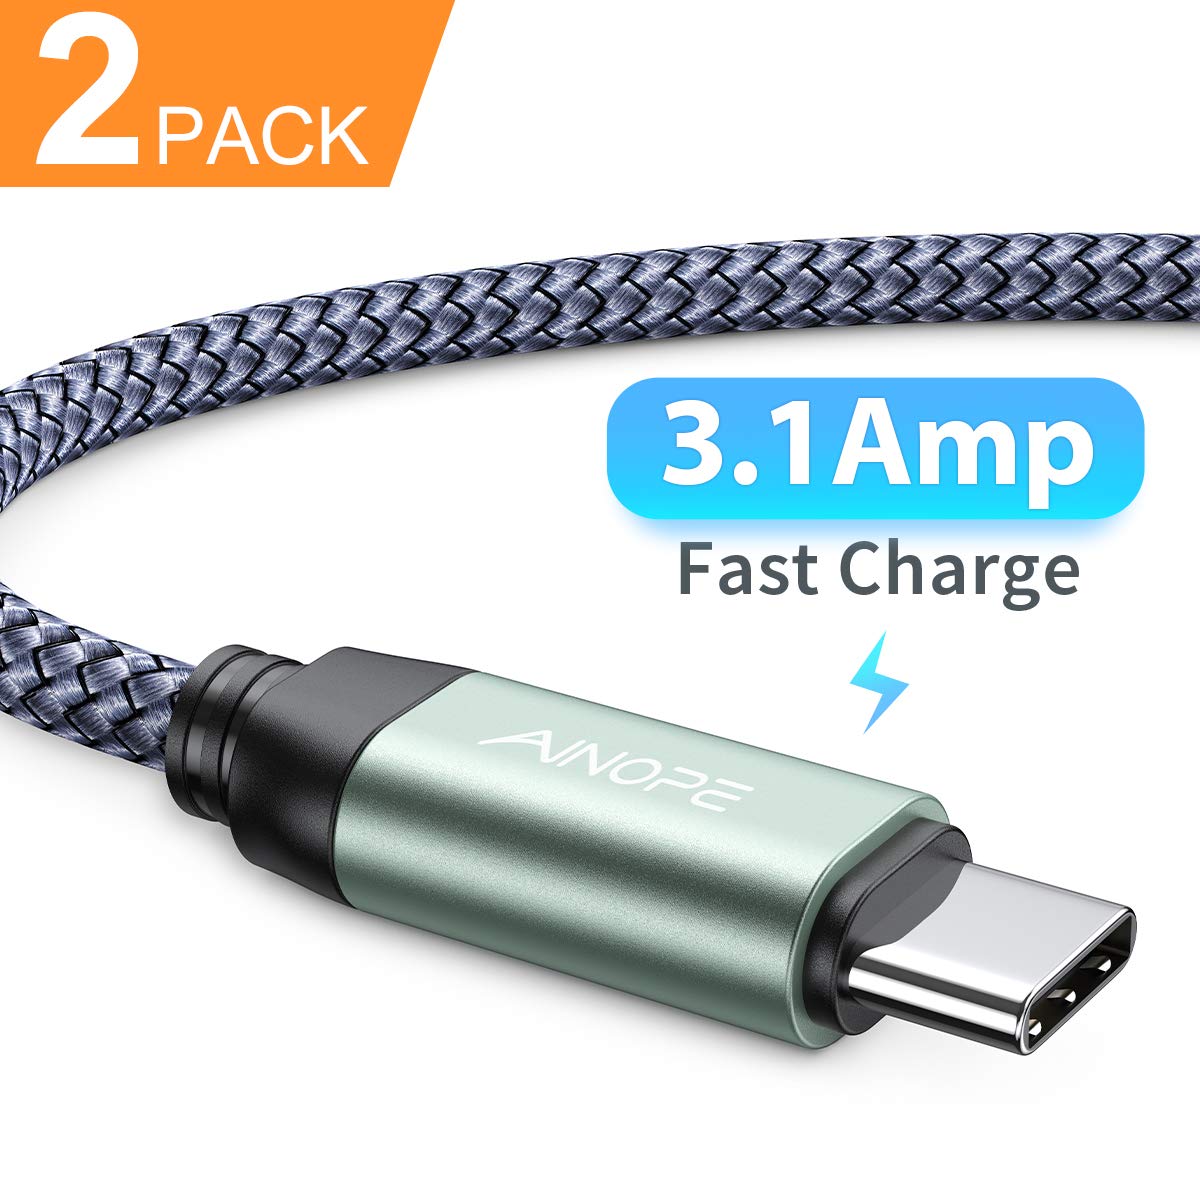 USB C Cable Fast Charging 3A Fast Charge - 2 PK / 6.6FT, AINOPE USB-A to Type-C Charger Cable,Durable Braided Armor C Cord Compatible Samsung Galaxy Note 9 8 S9 S8 S8 Plus S10,LG V30,V20,G6